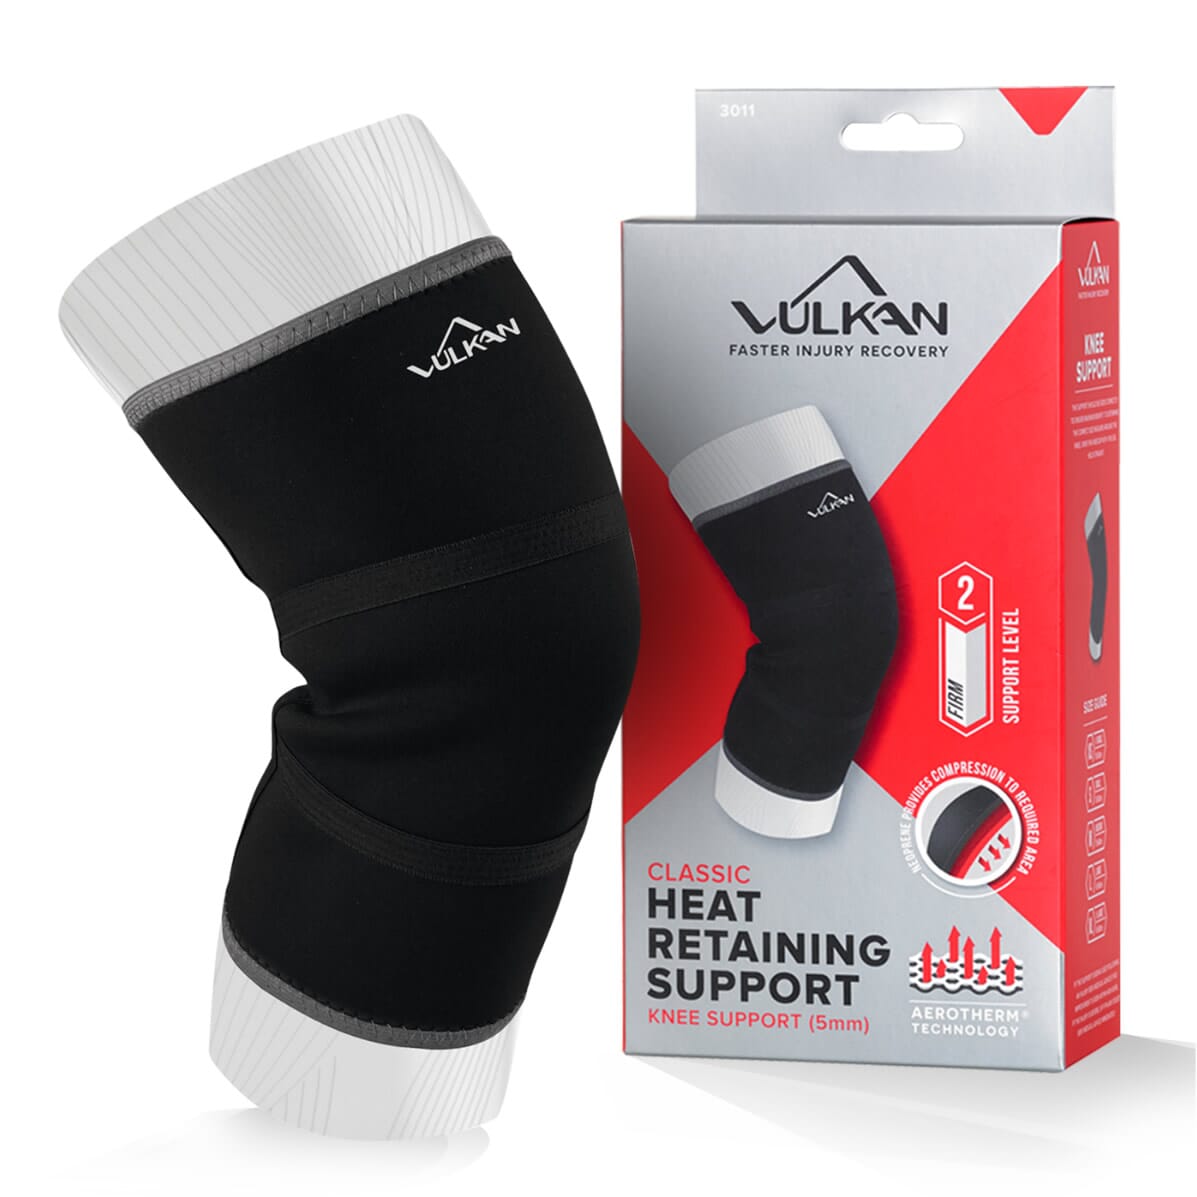 View Knee Support Vulkan XSmall 3mm thick information